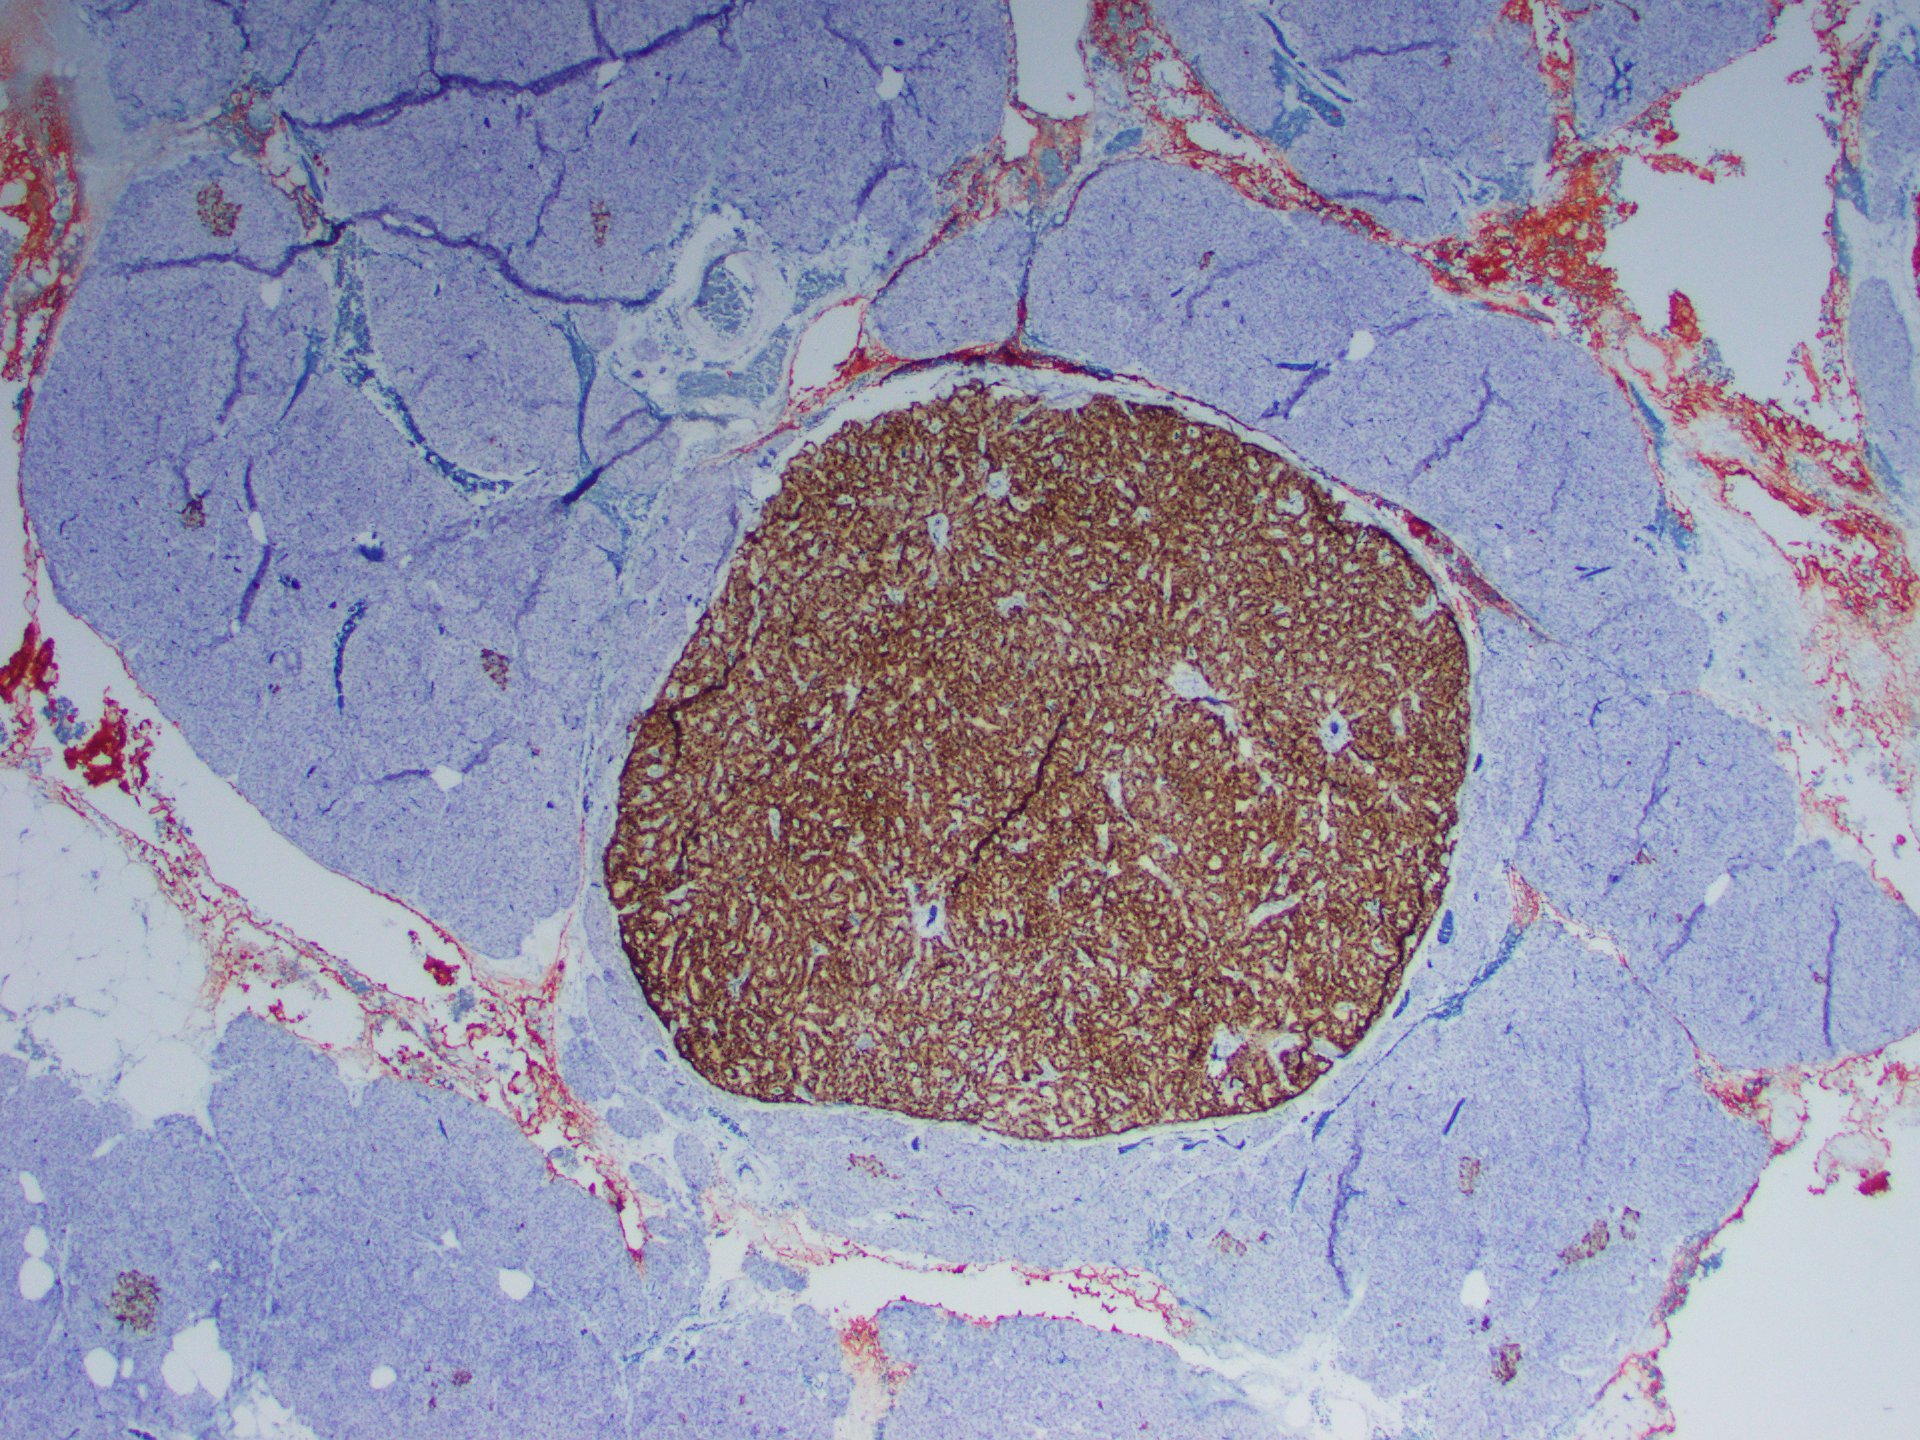 Figure 8: The patient’s microadenoma showed strong positive staining for chromogranin, similar to the PanNET. x20.